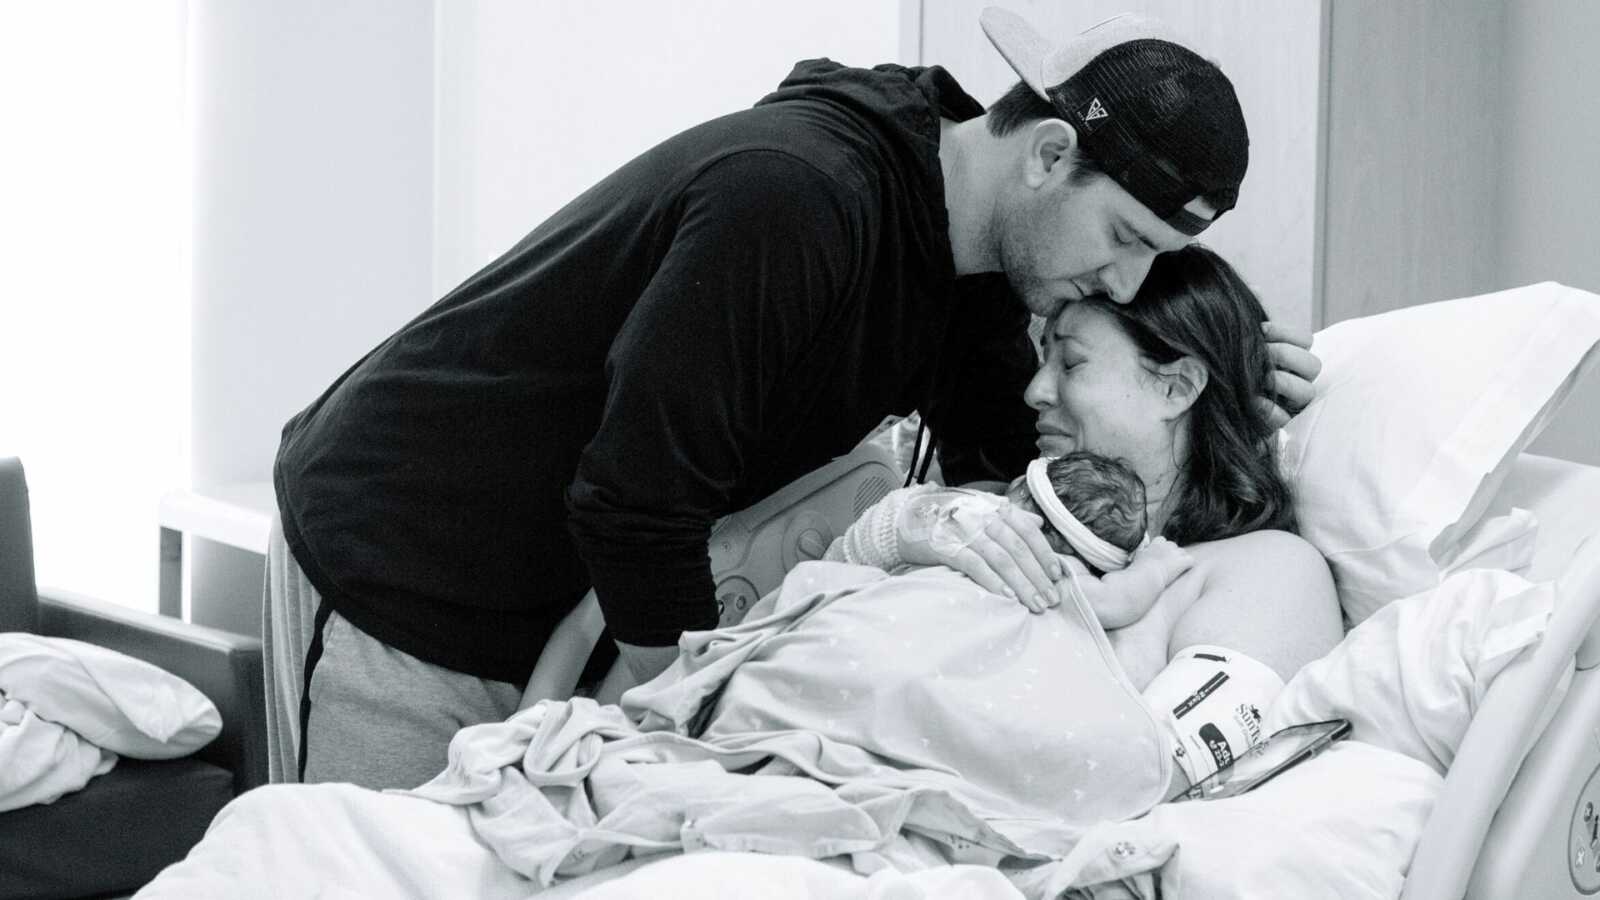 A husband and wife lean over the body of their stillborn daughter